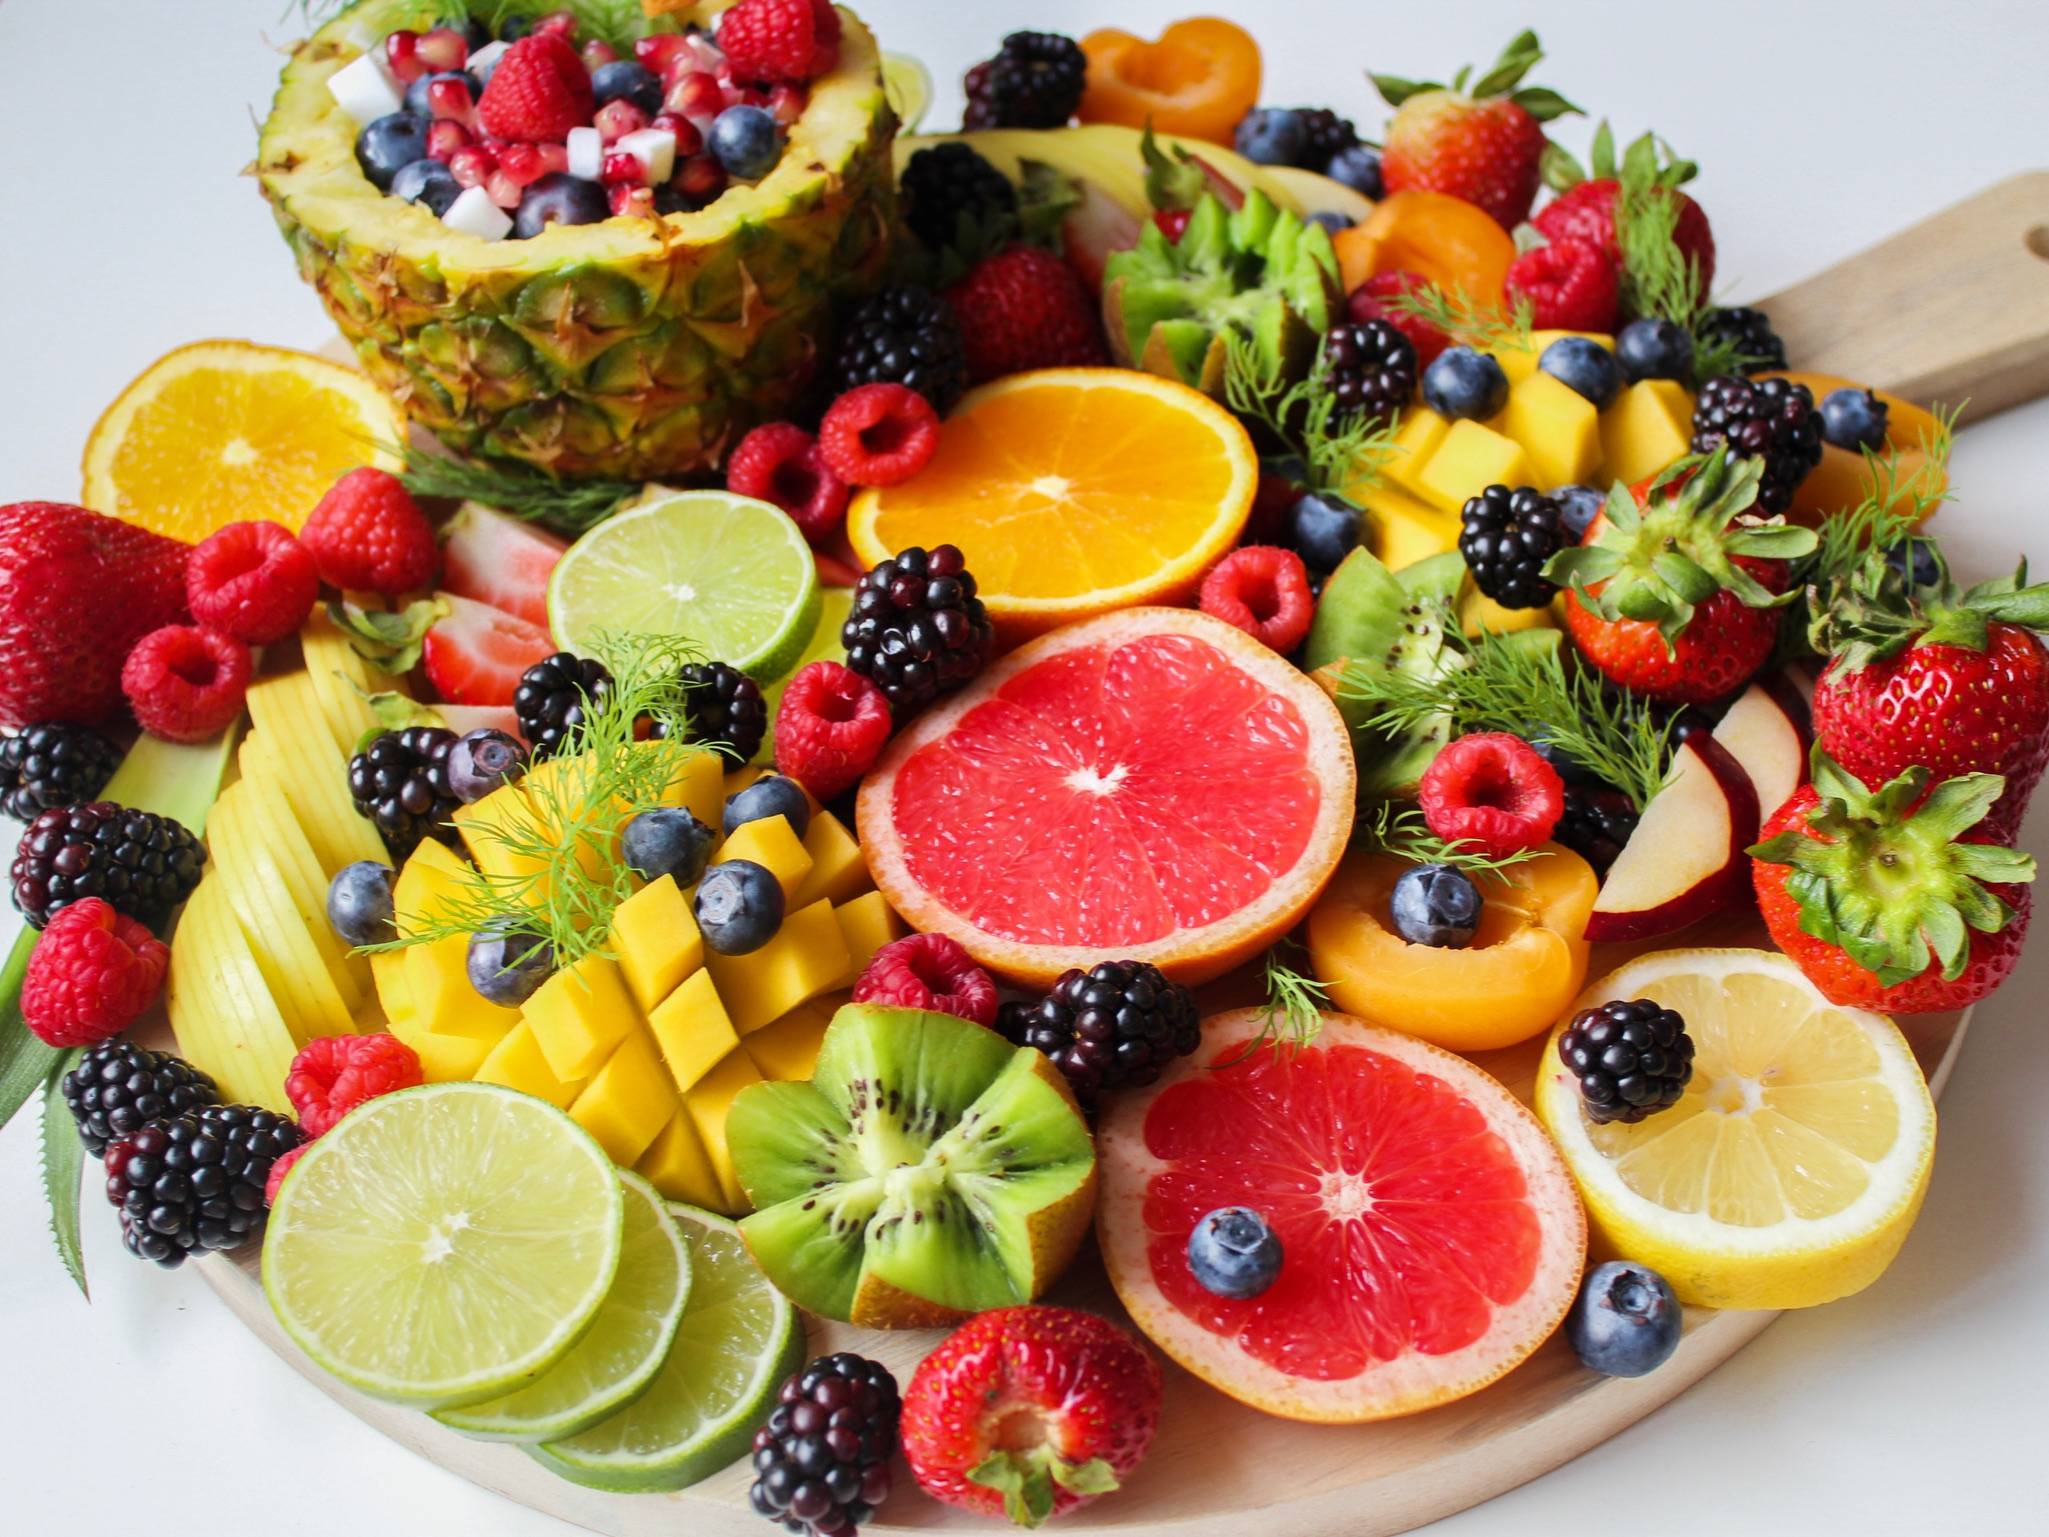 Bunch of fruits lying on the wooden platter